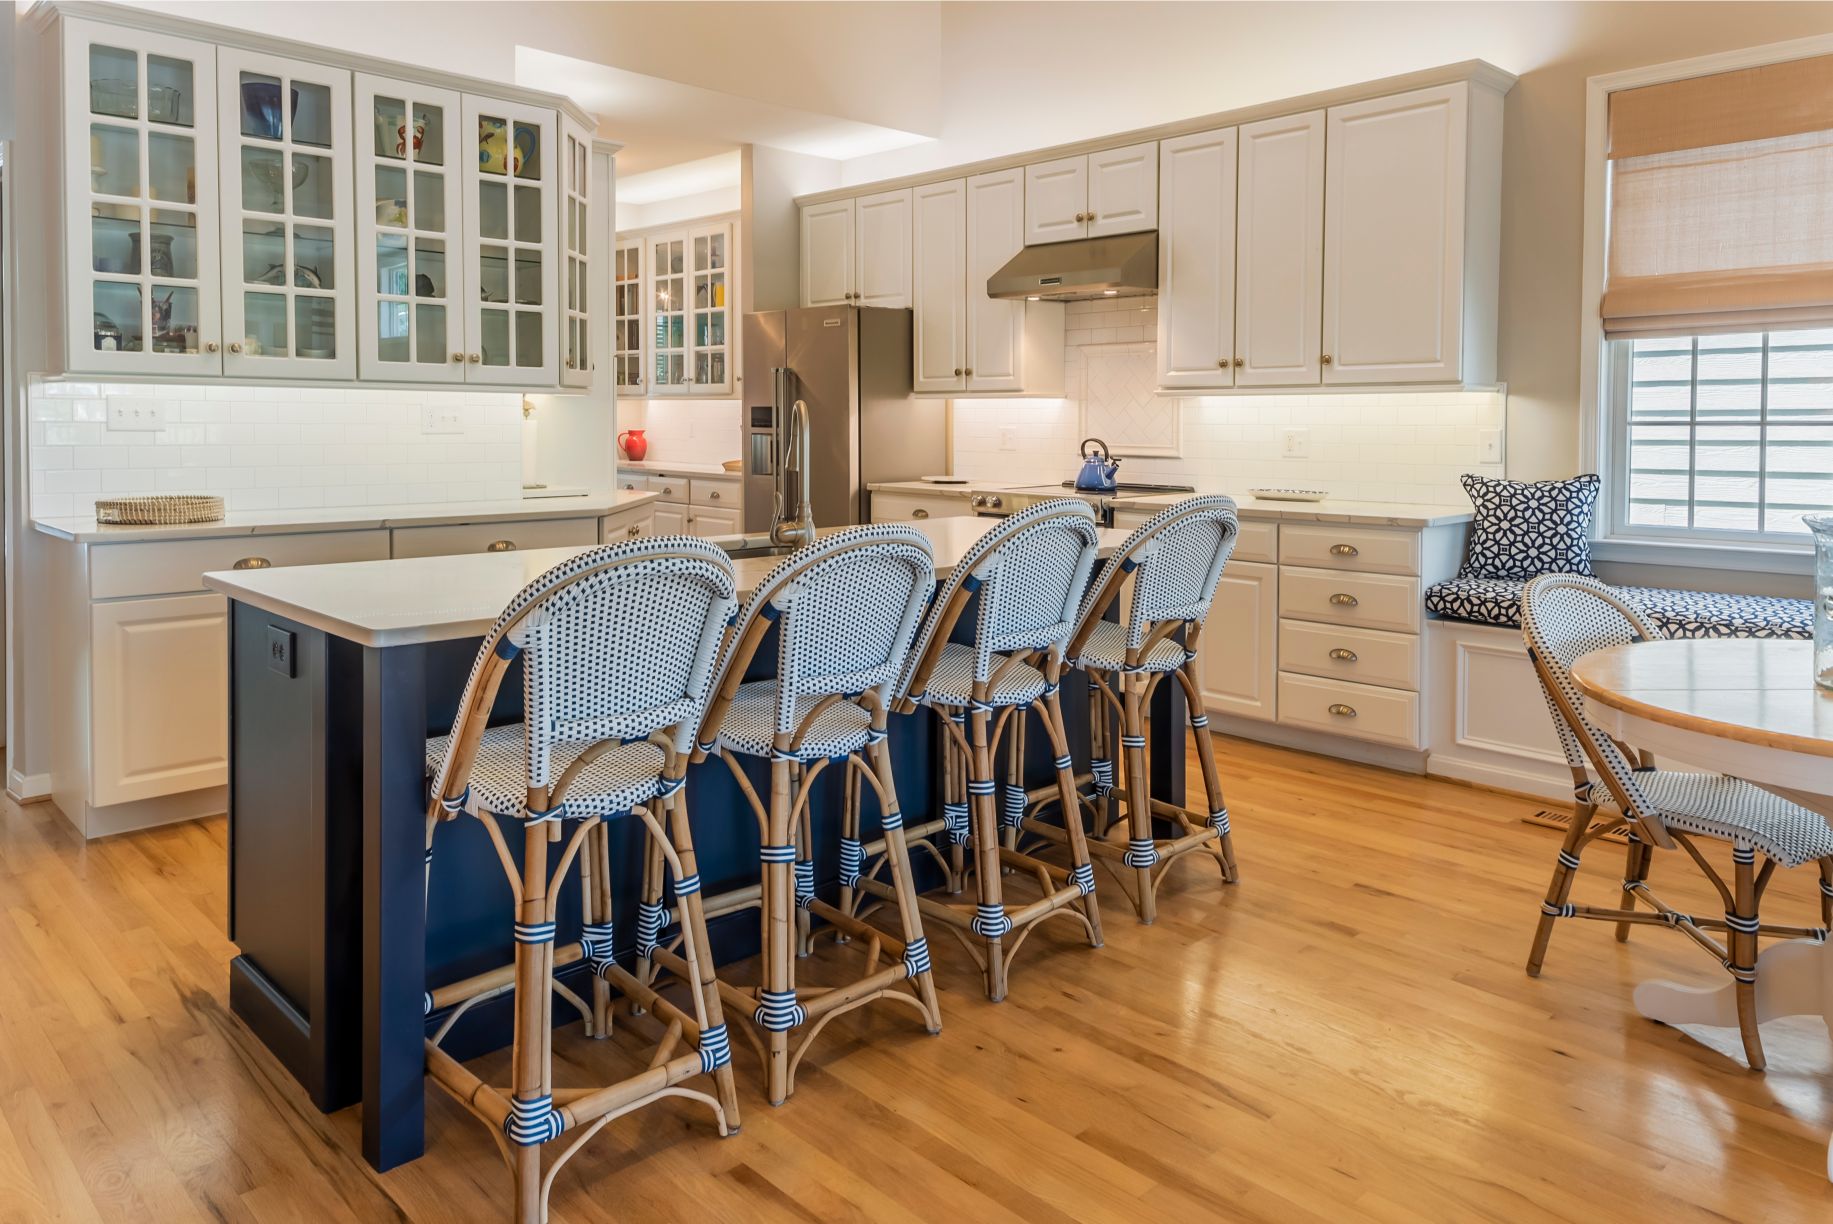 Kitchen Remodel in Willow Oak, Ocean View DE with Four Stools and Navy Blue Center Island Cabinets